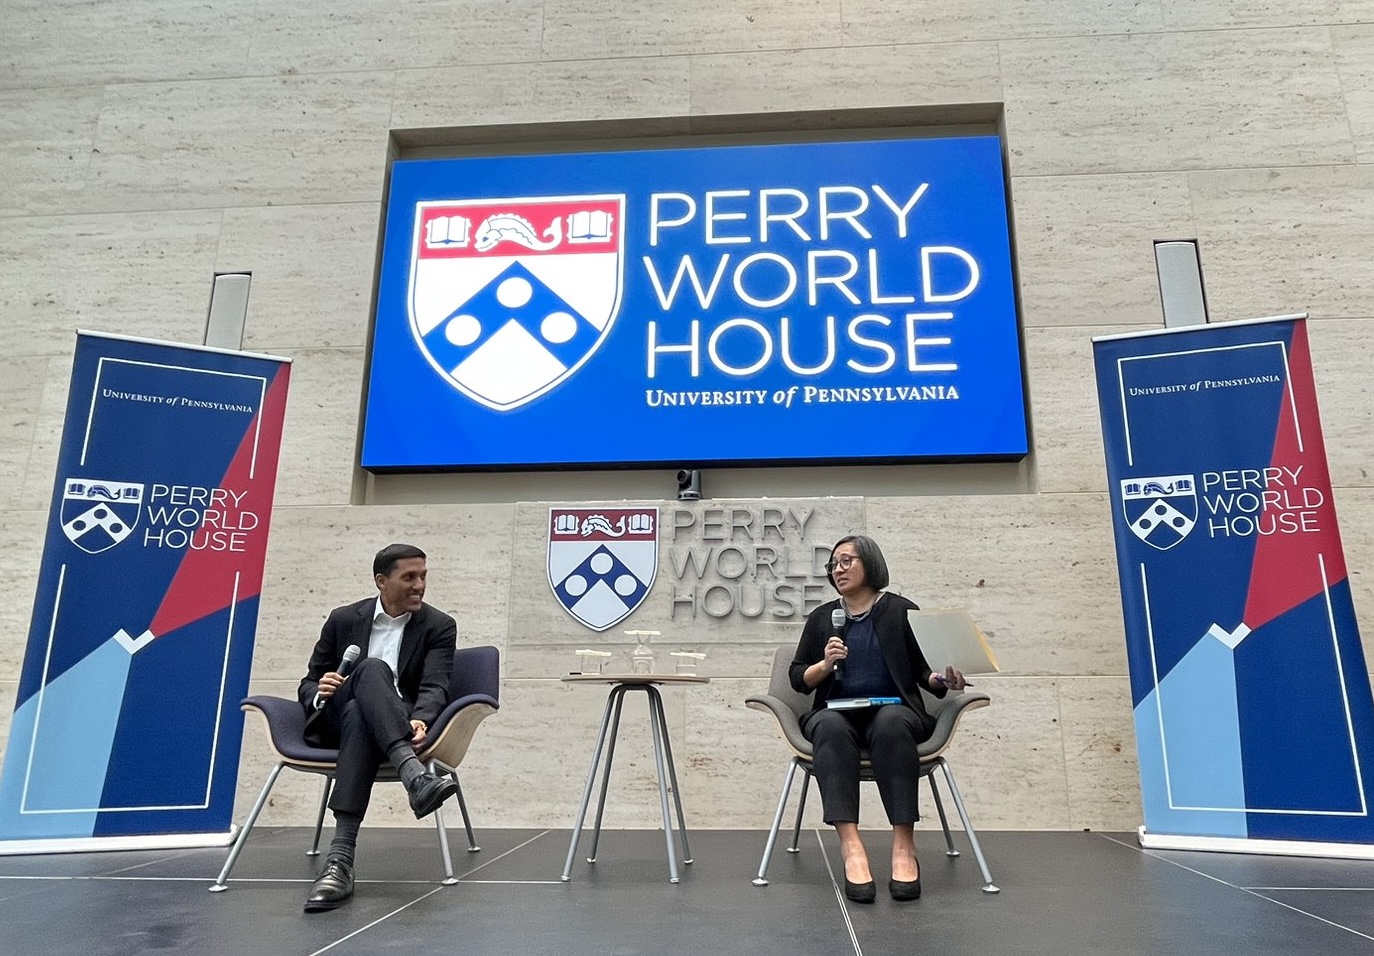 Rajiv Shah and Kat Rosqueta sit on a stage in front of a sign that says "Perry World House"